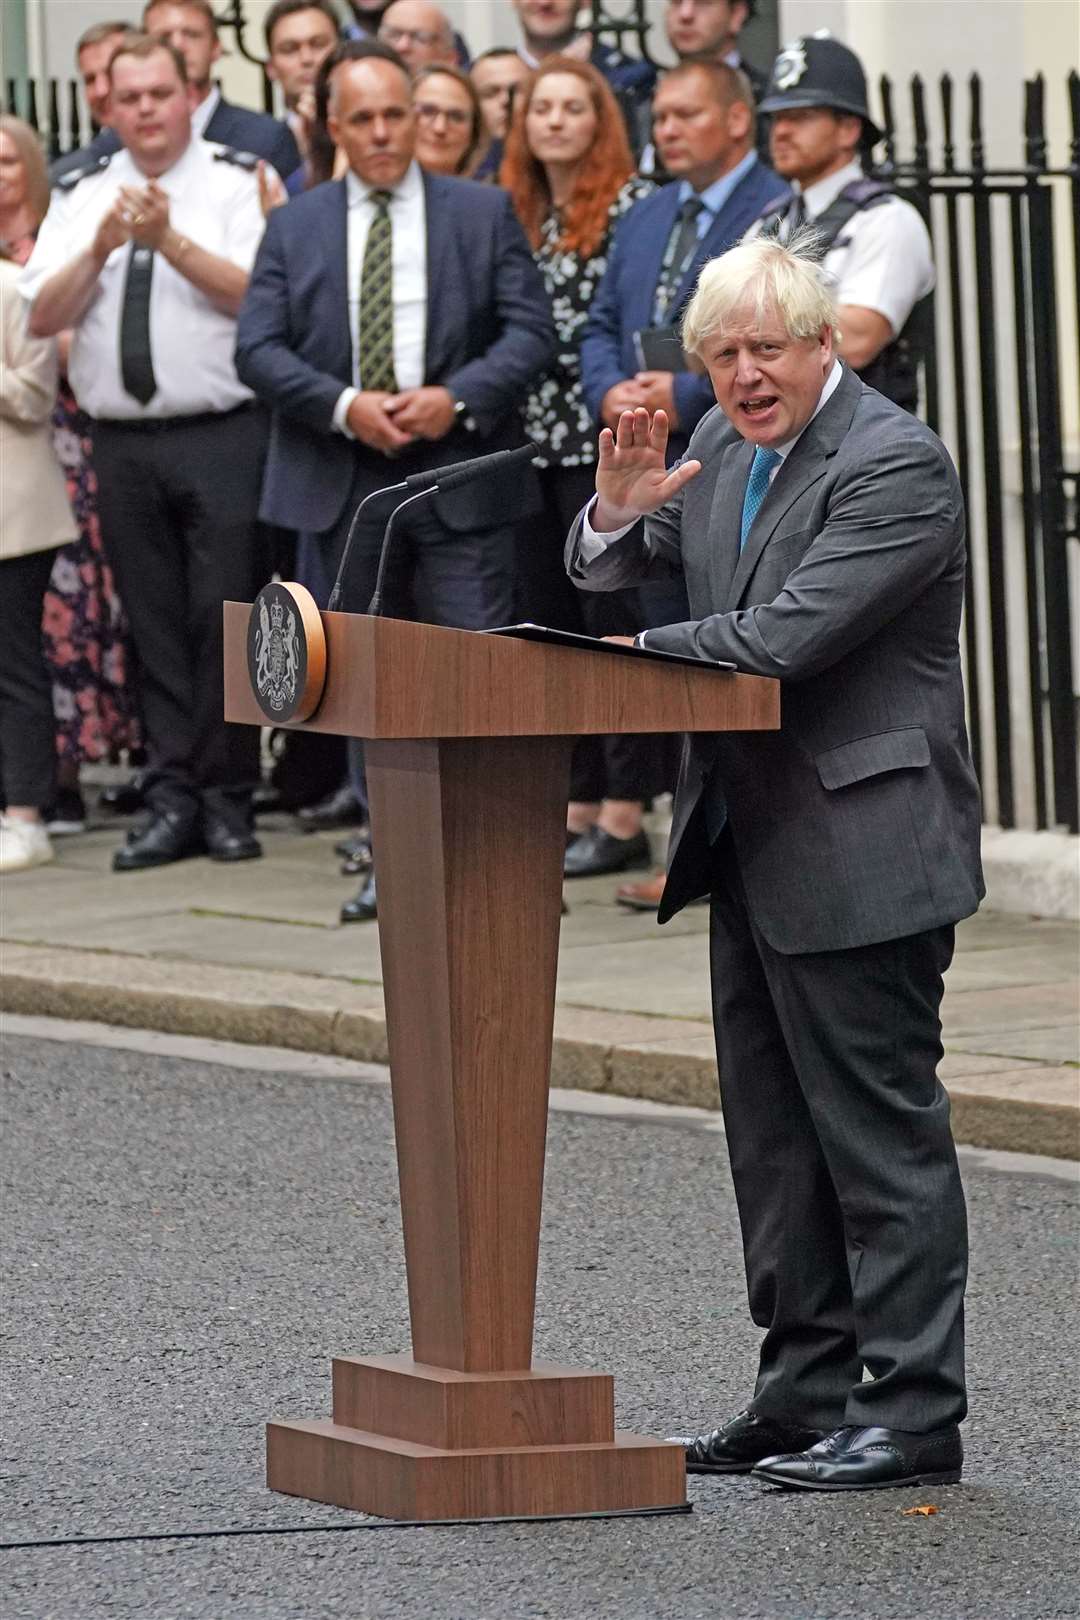 Then-outgoing prime minister Boris Johnson speaking outside 10 Downing Street (PA)